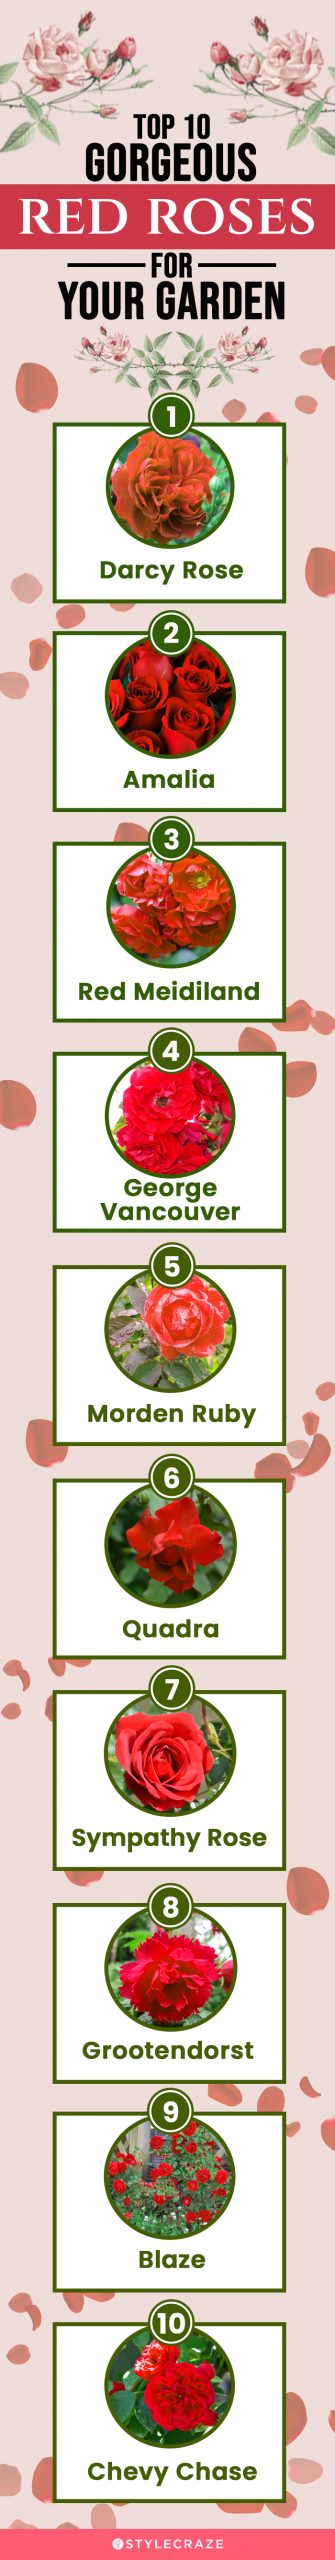 top 10 gorgeous red roses for your garden (infographic)